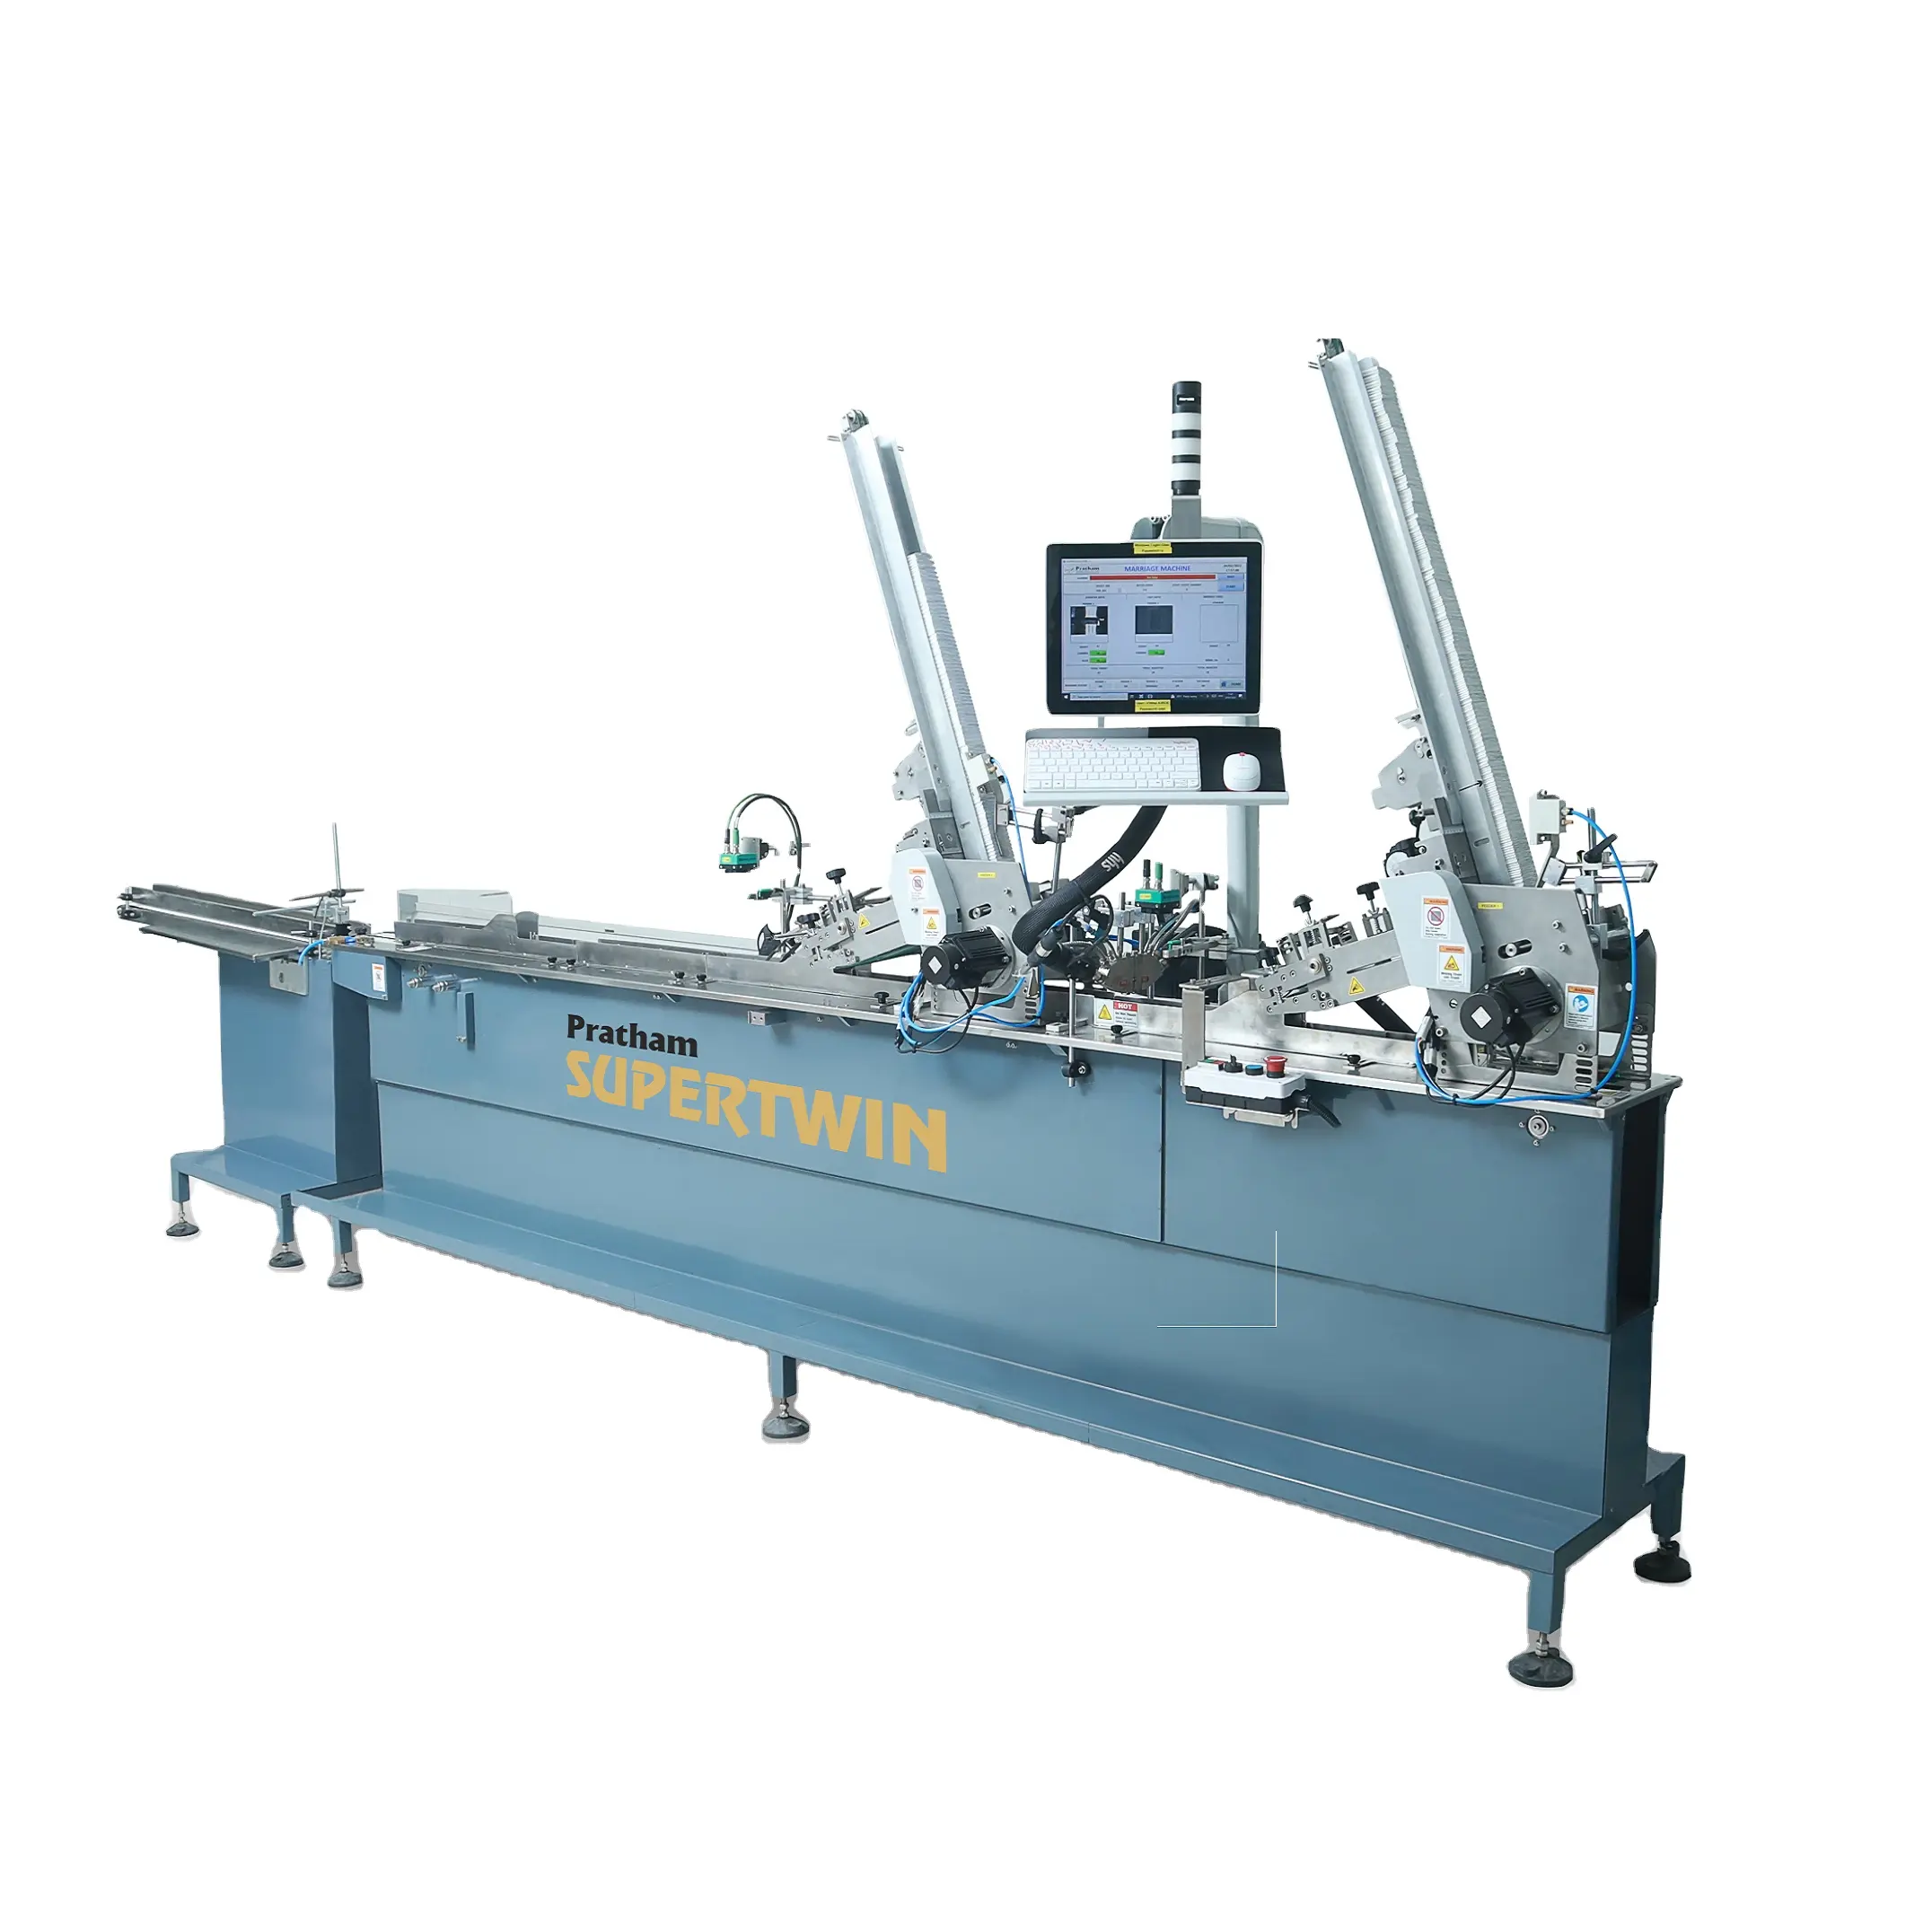 Top Grade Twinserts 100 Automatic Paper Processing Machinery 1200mm Workable Width 180 m/min Production Capacity